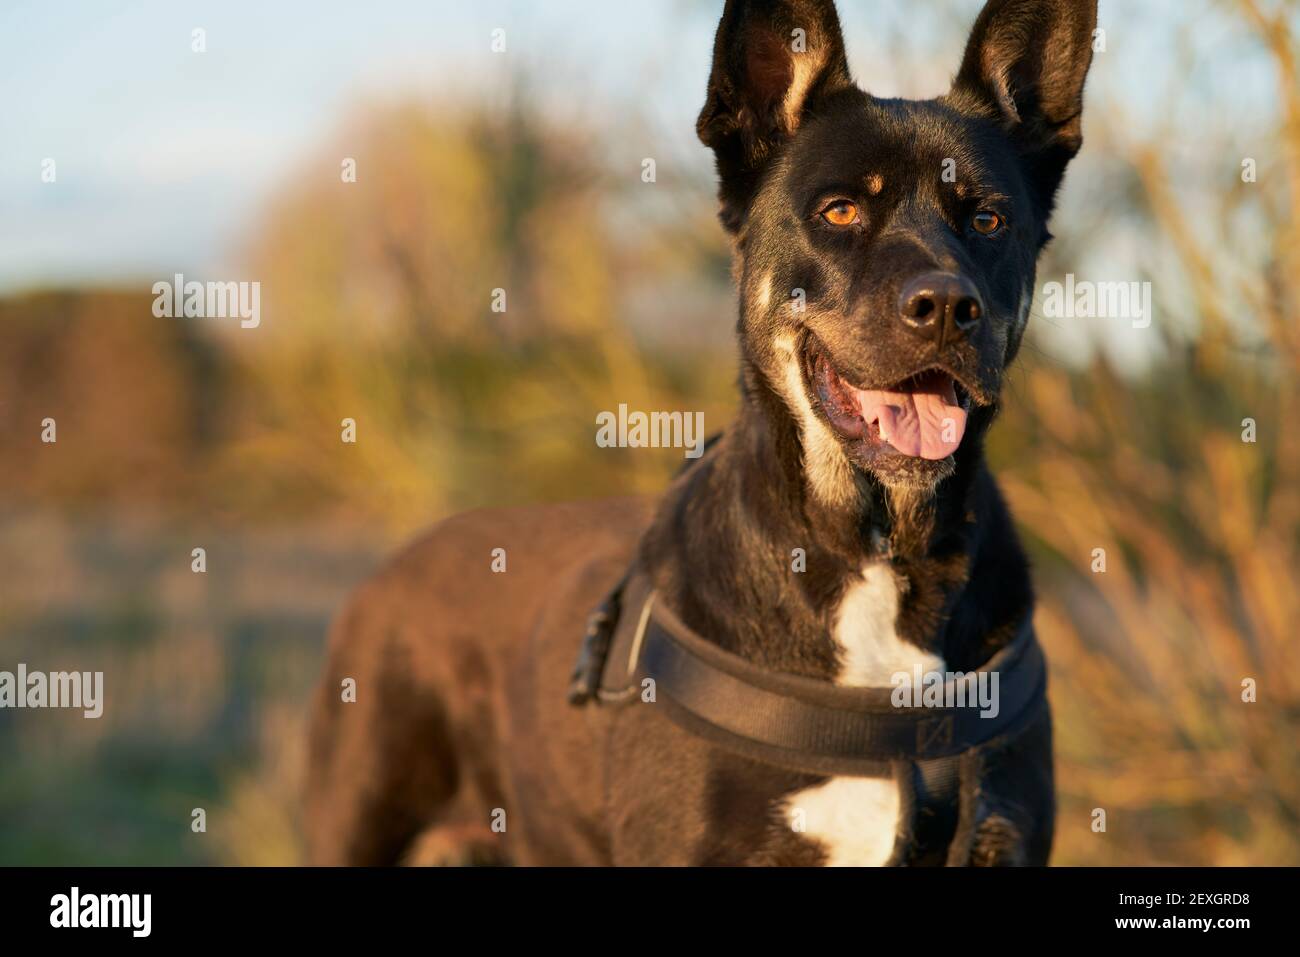 Black dog with alert brown and white spots in a green field Stock Photo